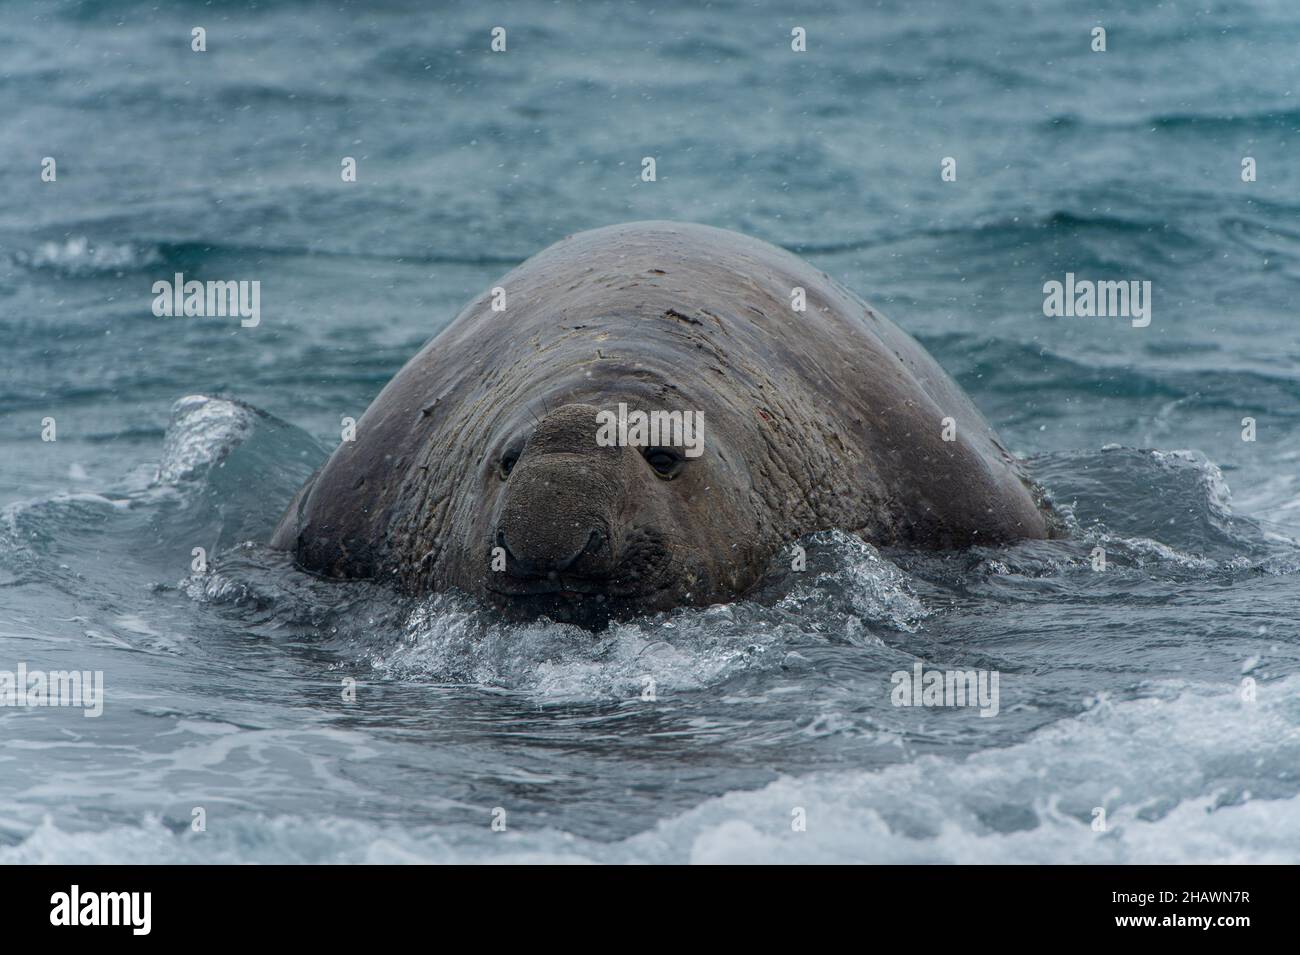 An elephant seal swims in the ocean at Gold harbour, South Georgia Stock Photo